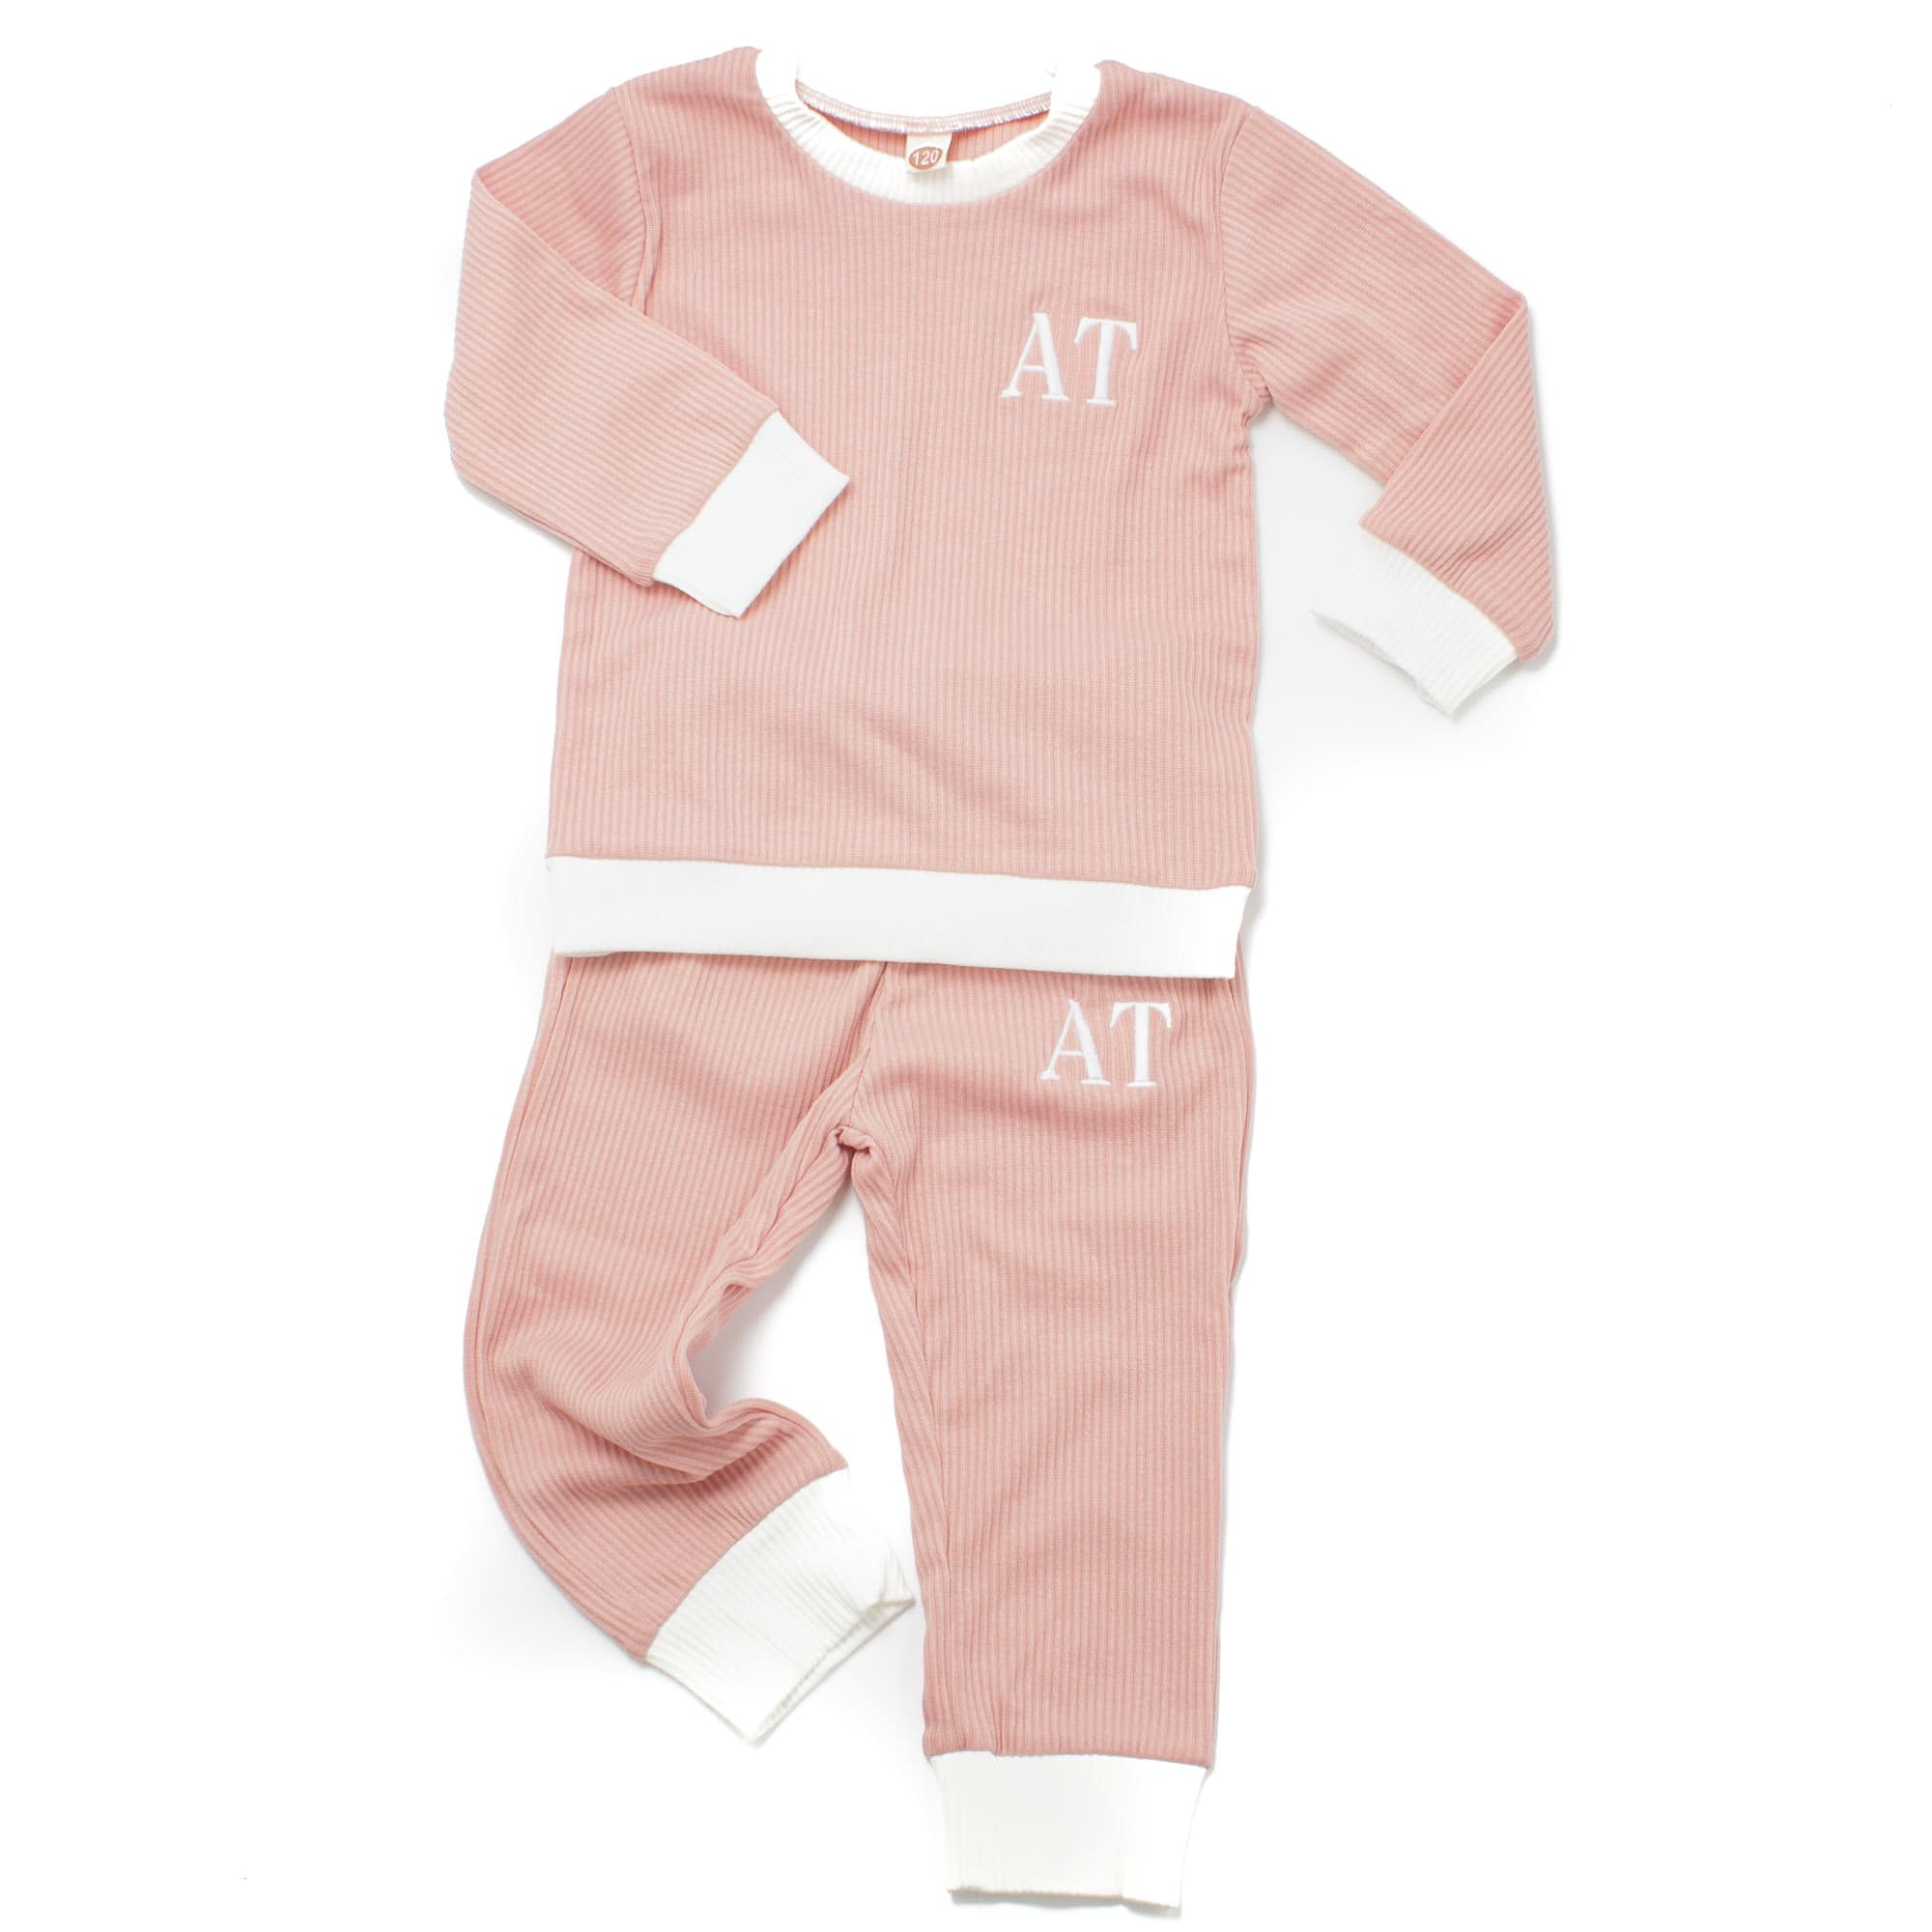 baby-clothes-518.jpg